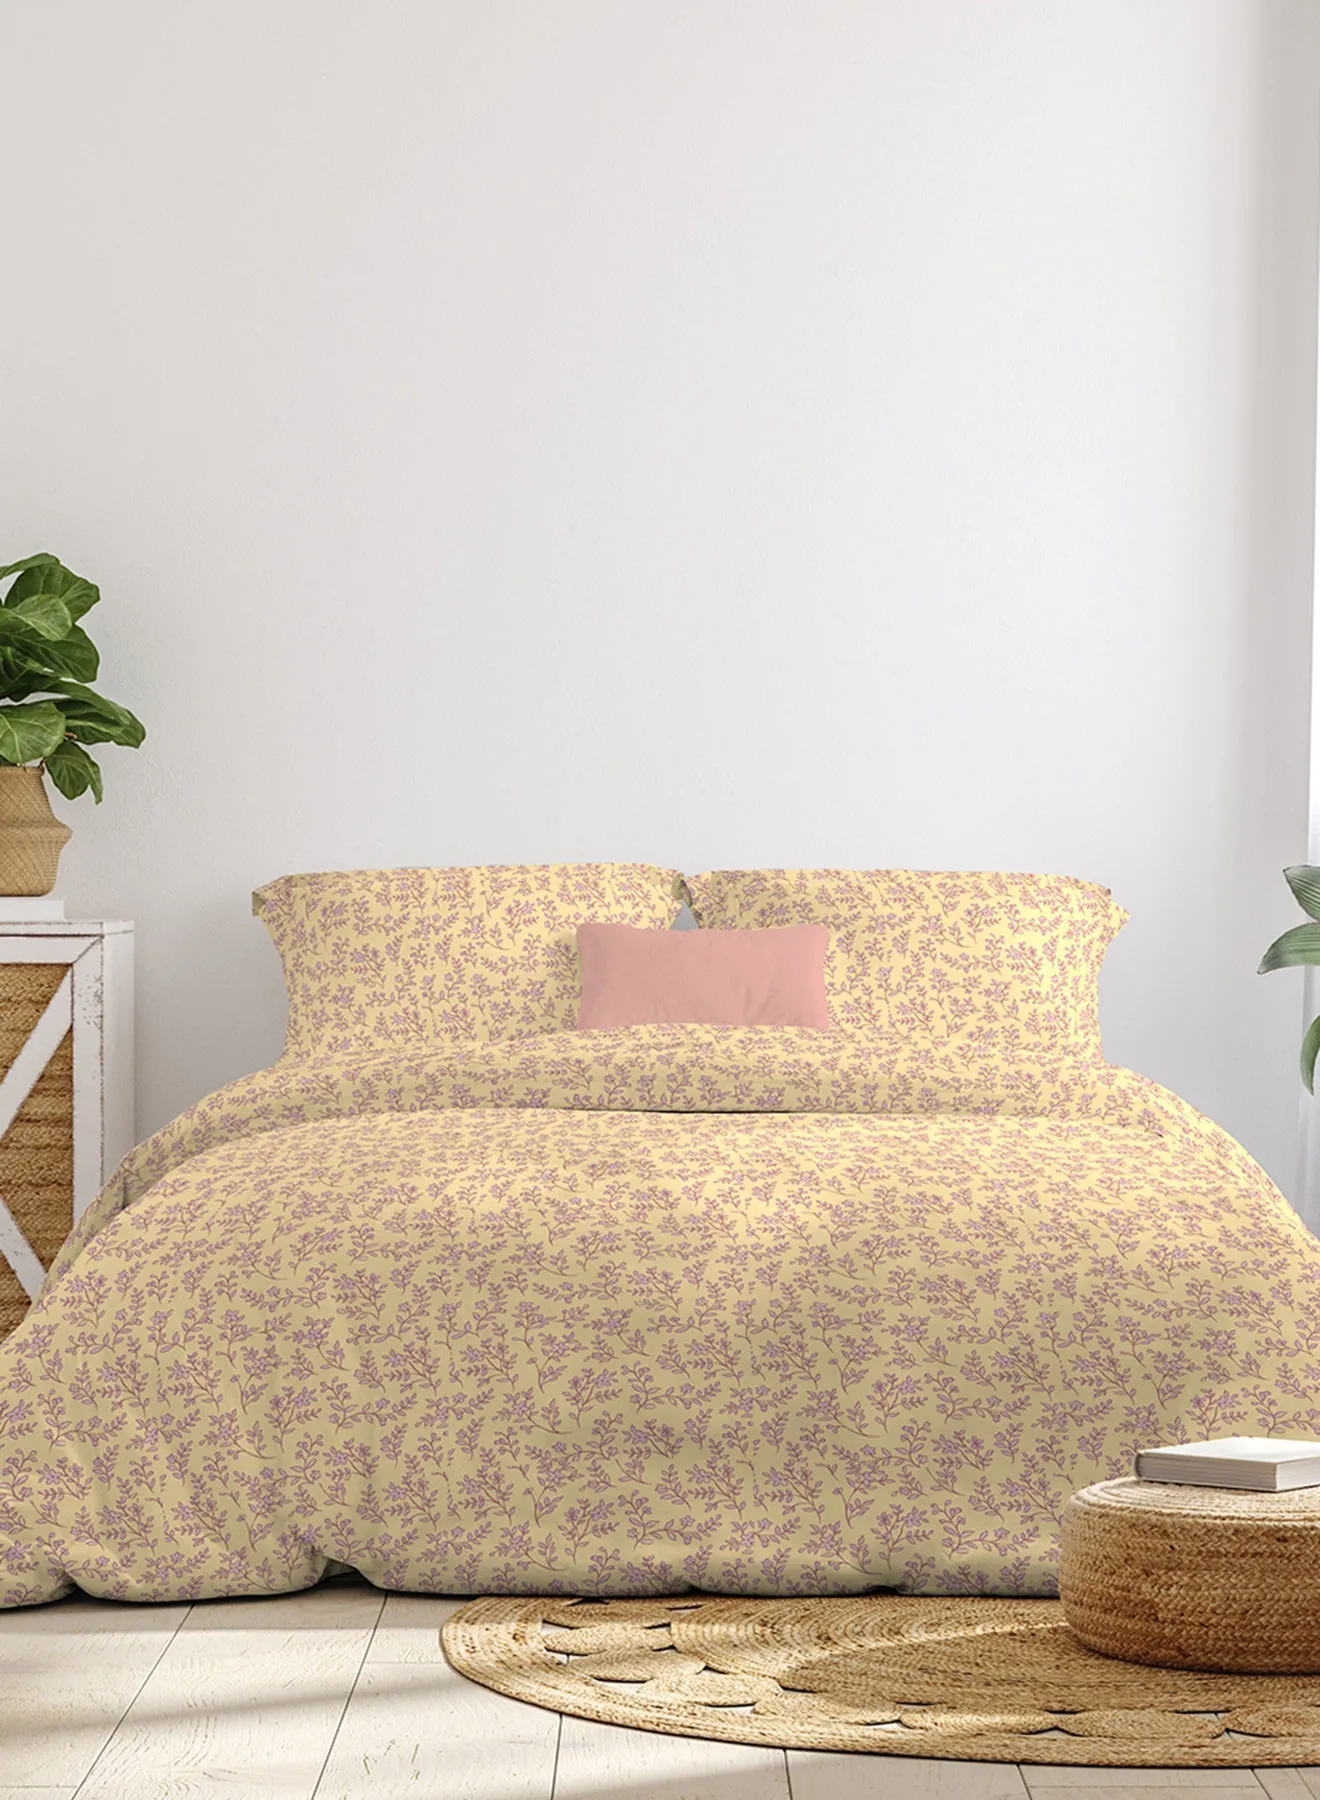 Amal Comforter Set Queen Size All Season Everyday Use Bedding Set 100% Cotton 3 Pieces 1 Comforter 2 Pillow Covers  Yellow/Light Purple